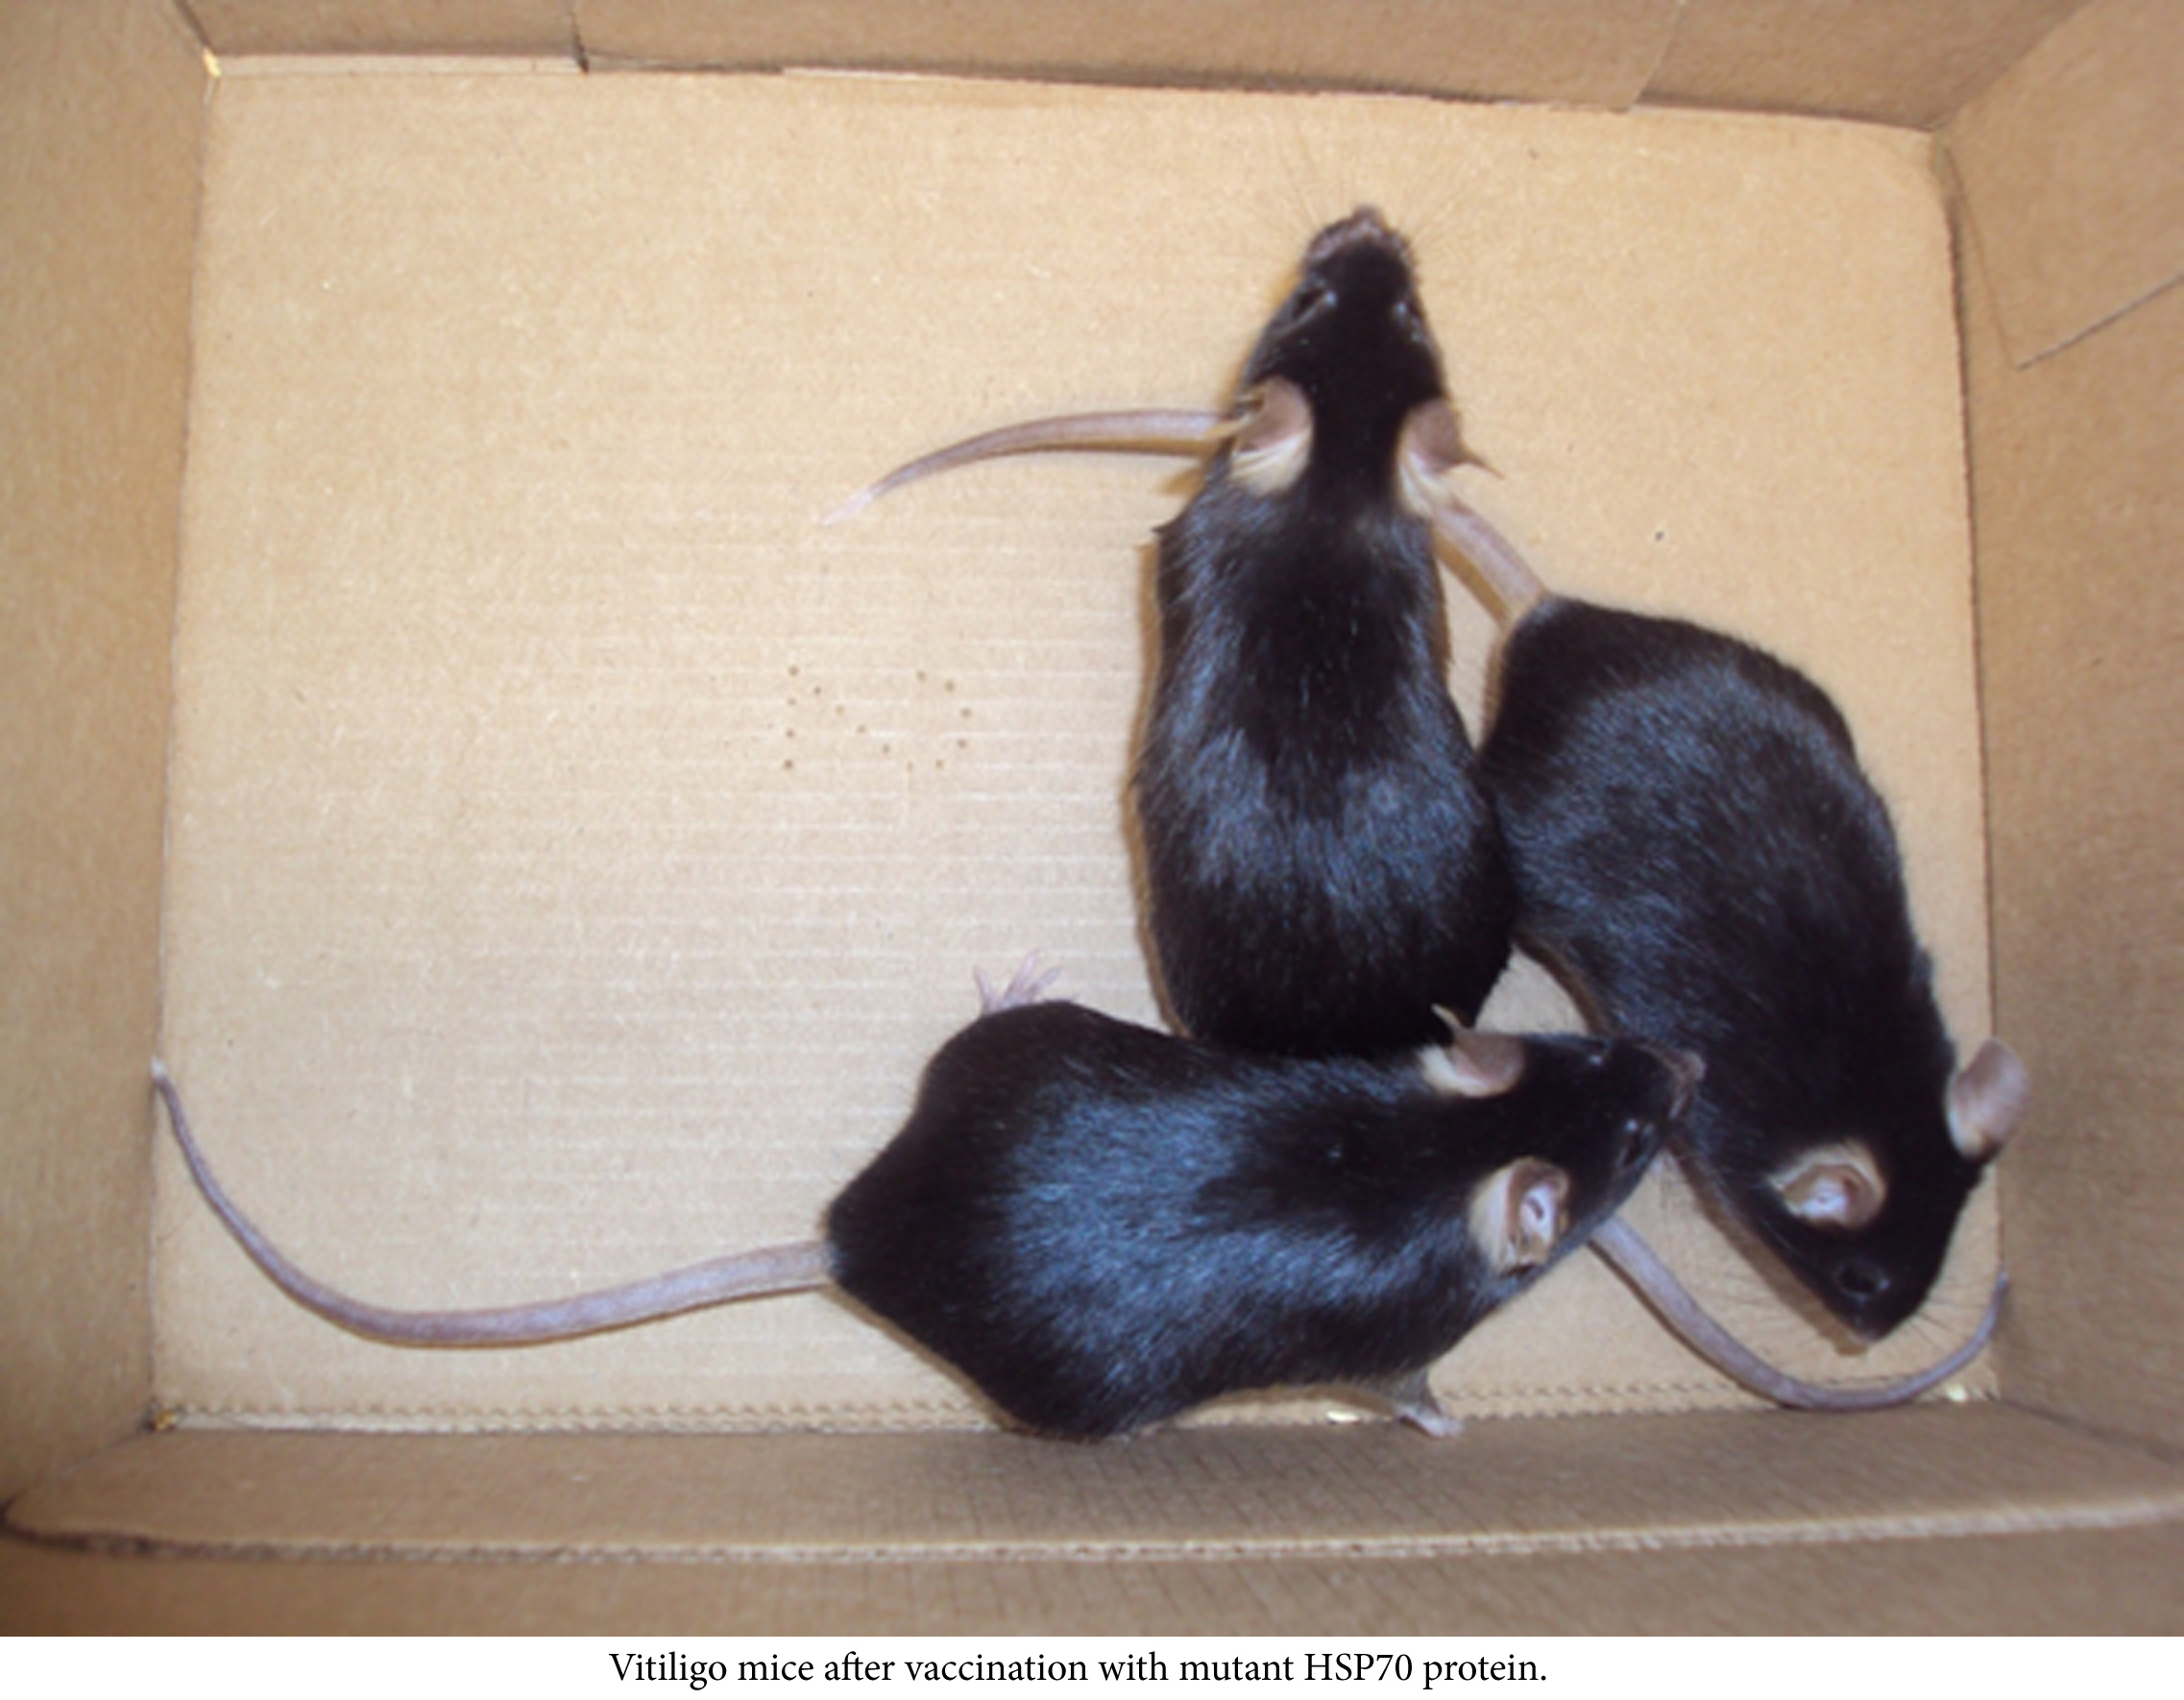 before and after images of mice with vitiligo and mice after treatment